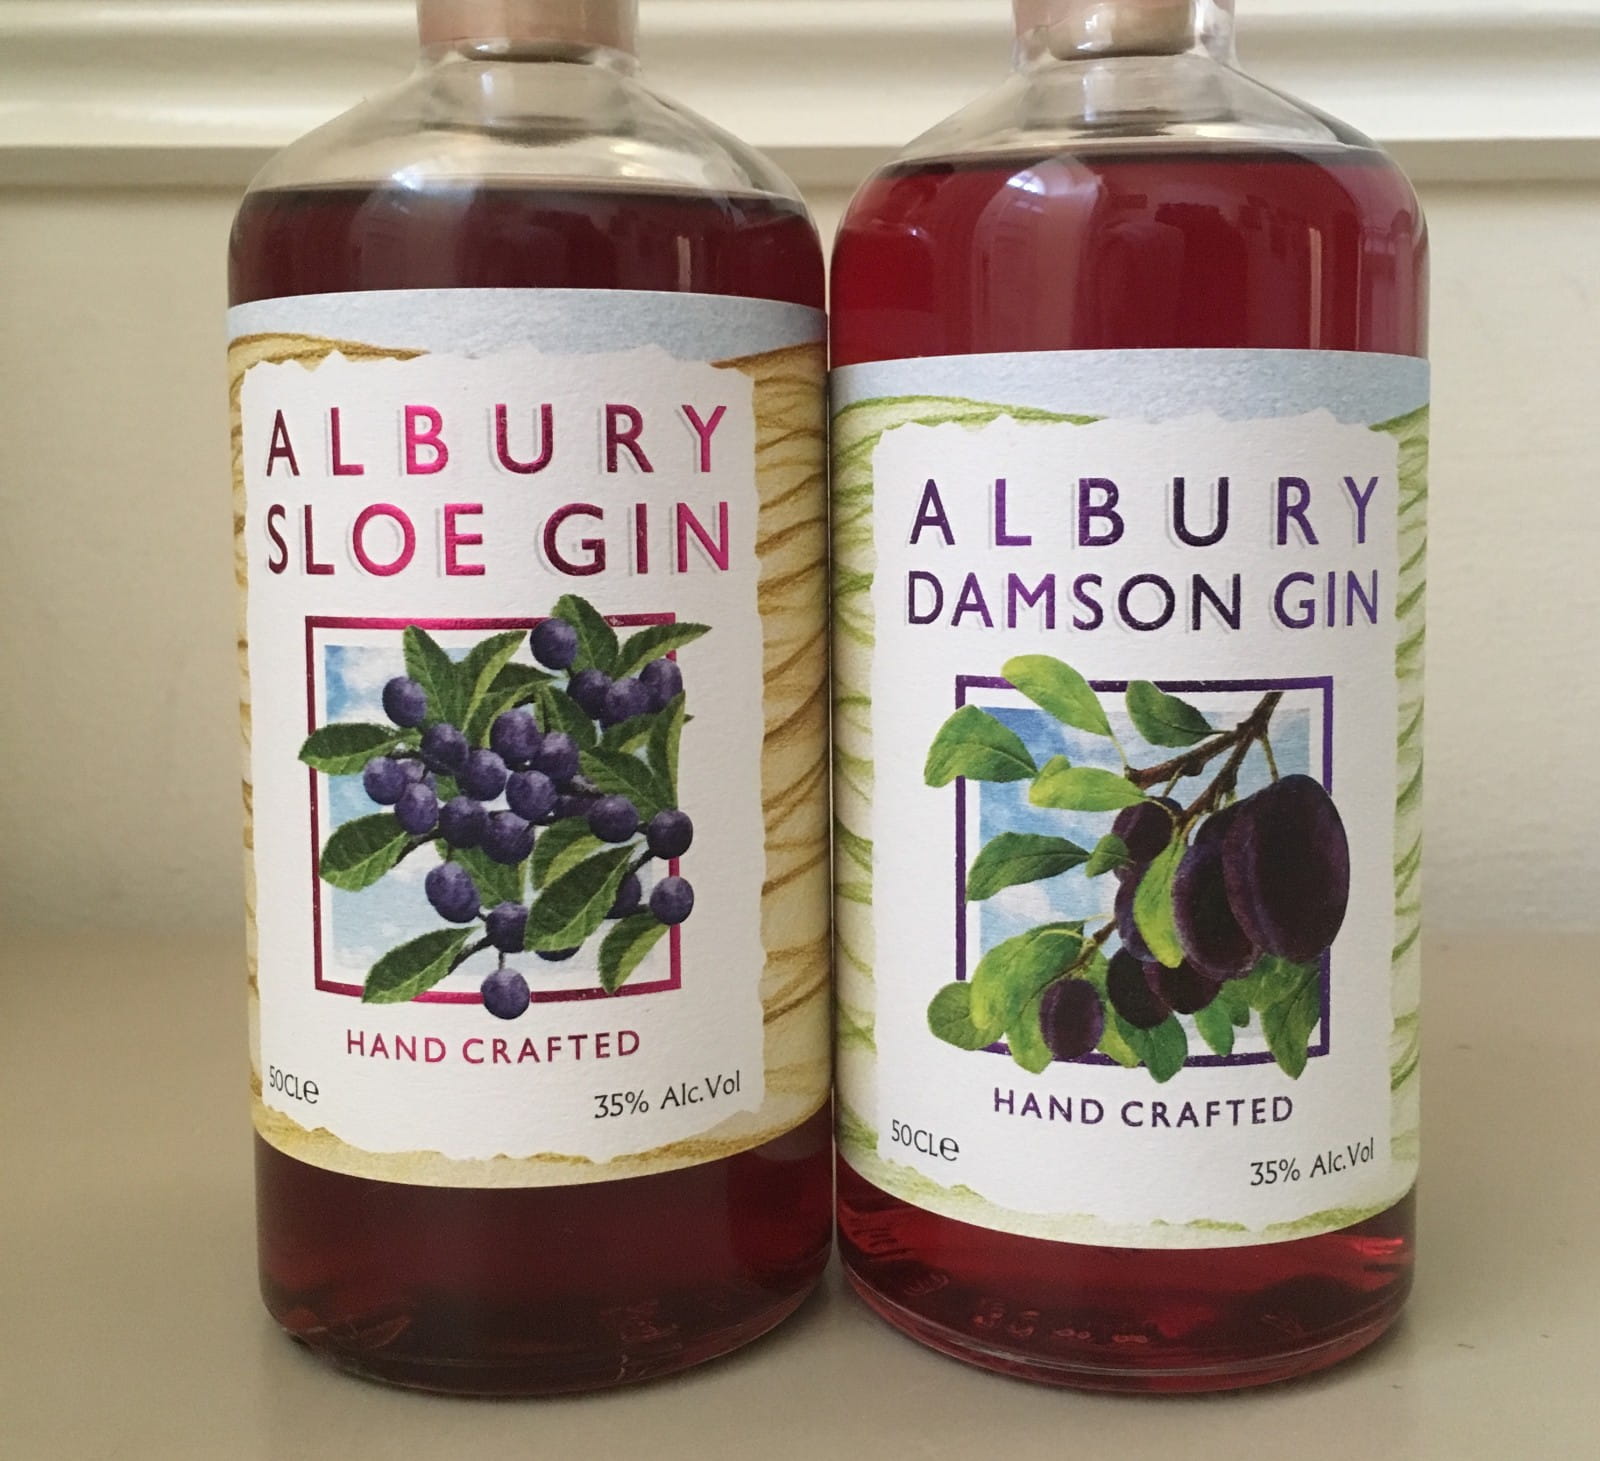 Gin of the month: Albury sloe and damson gins